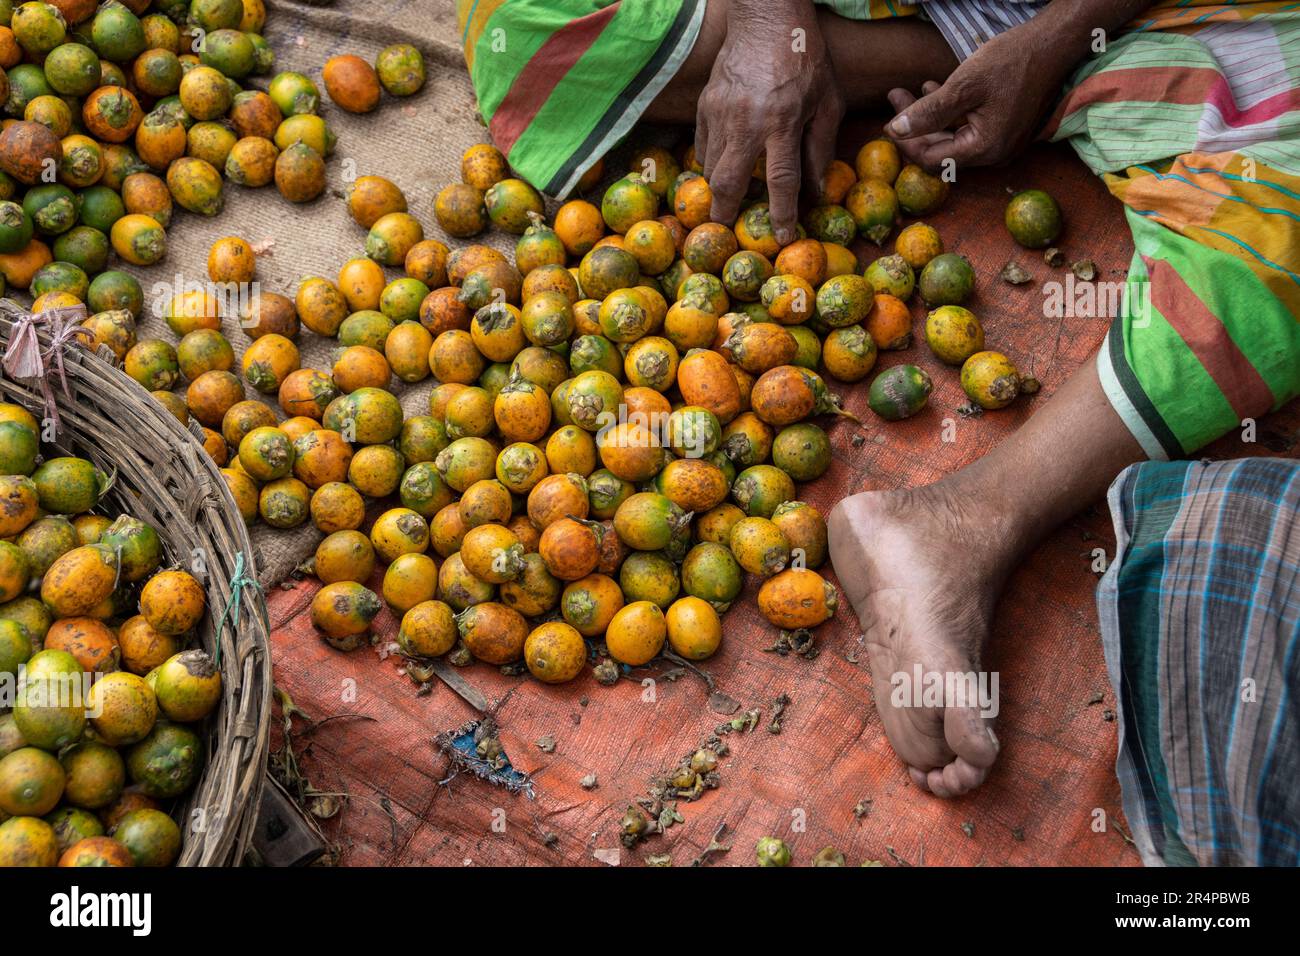 Areca nut fruits for sale in a market in Old Town Dhaka, Bangladesh Stock Photo